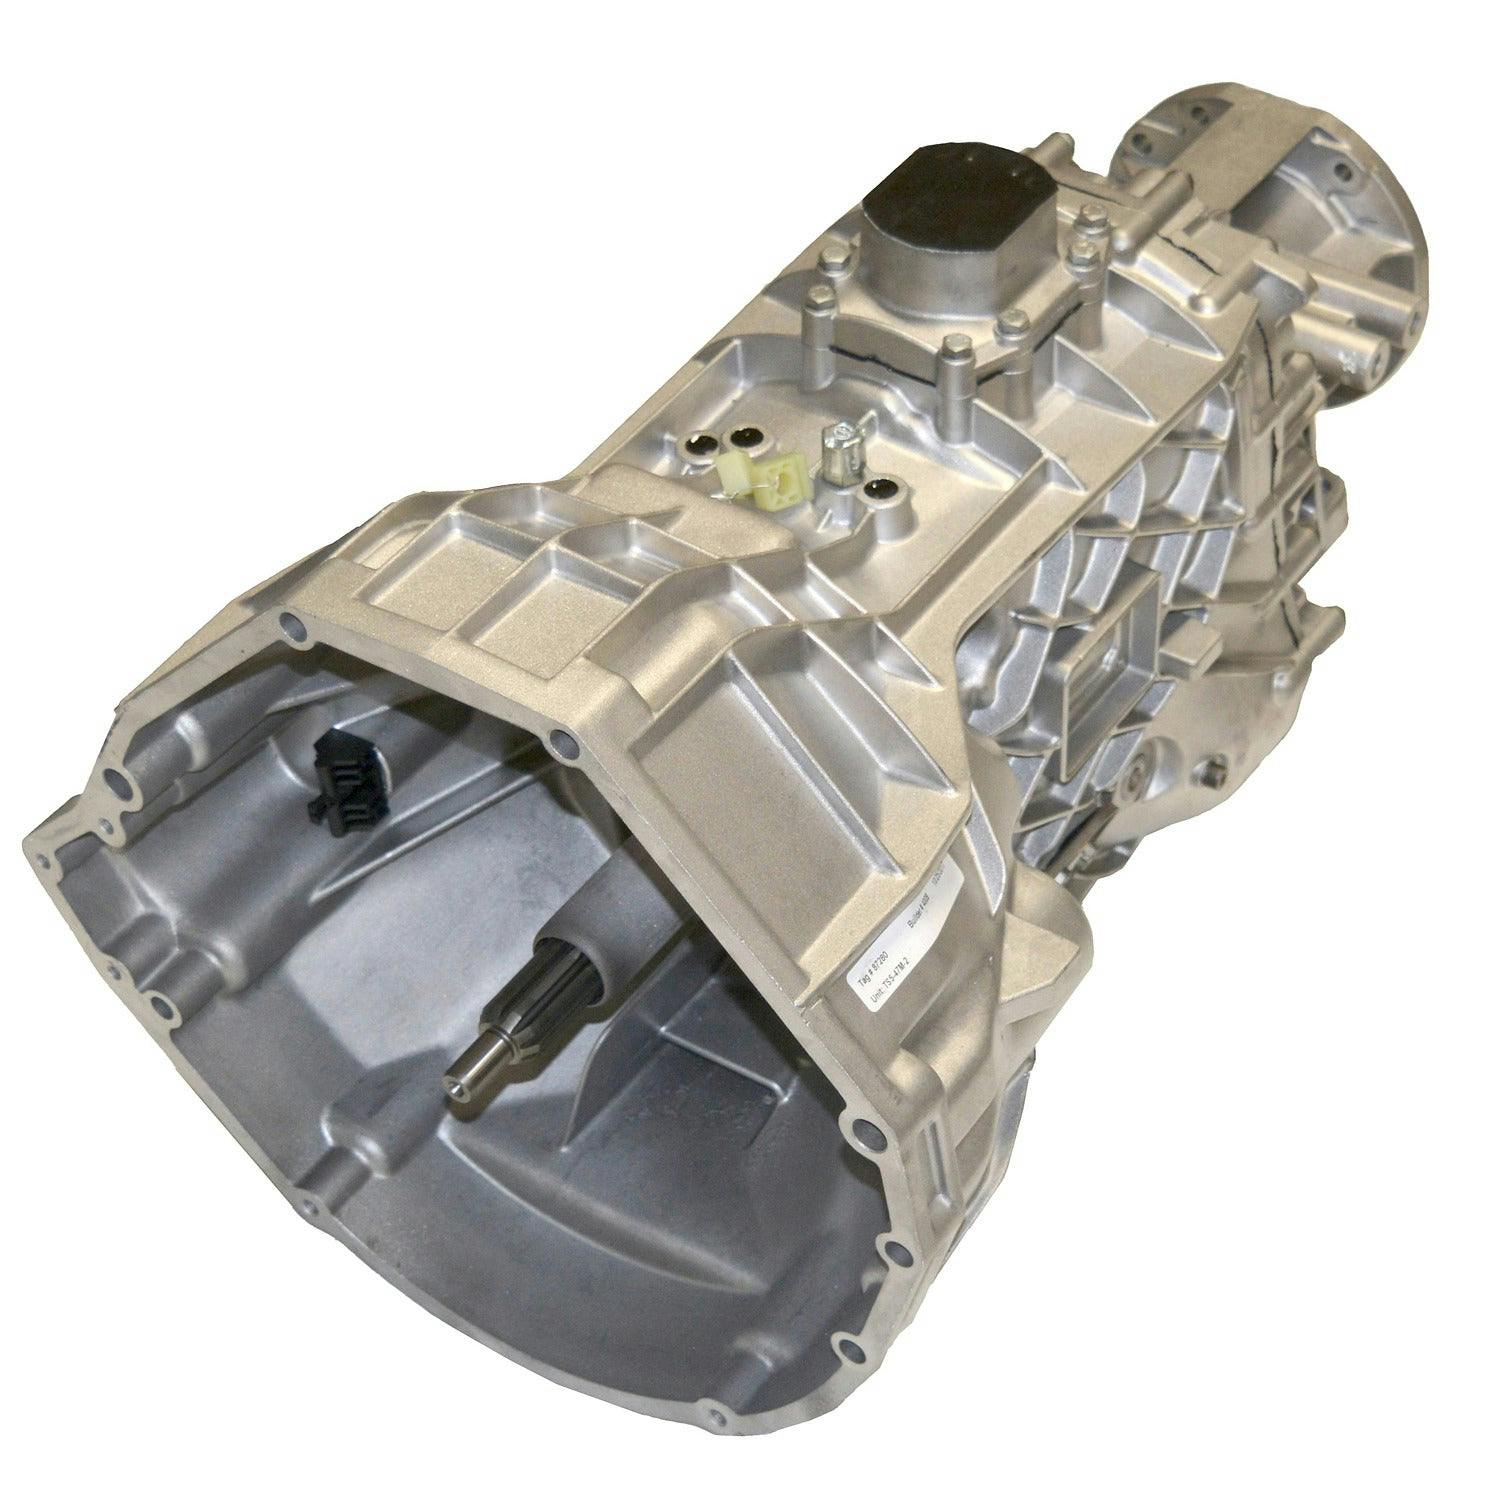 Manual Transmission for 1999-2001 Ford F-250/350/450/550 Super Duty 4WD with 5.4/6.8L Engine